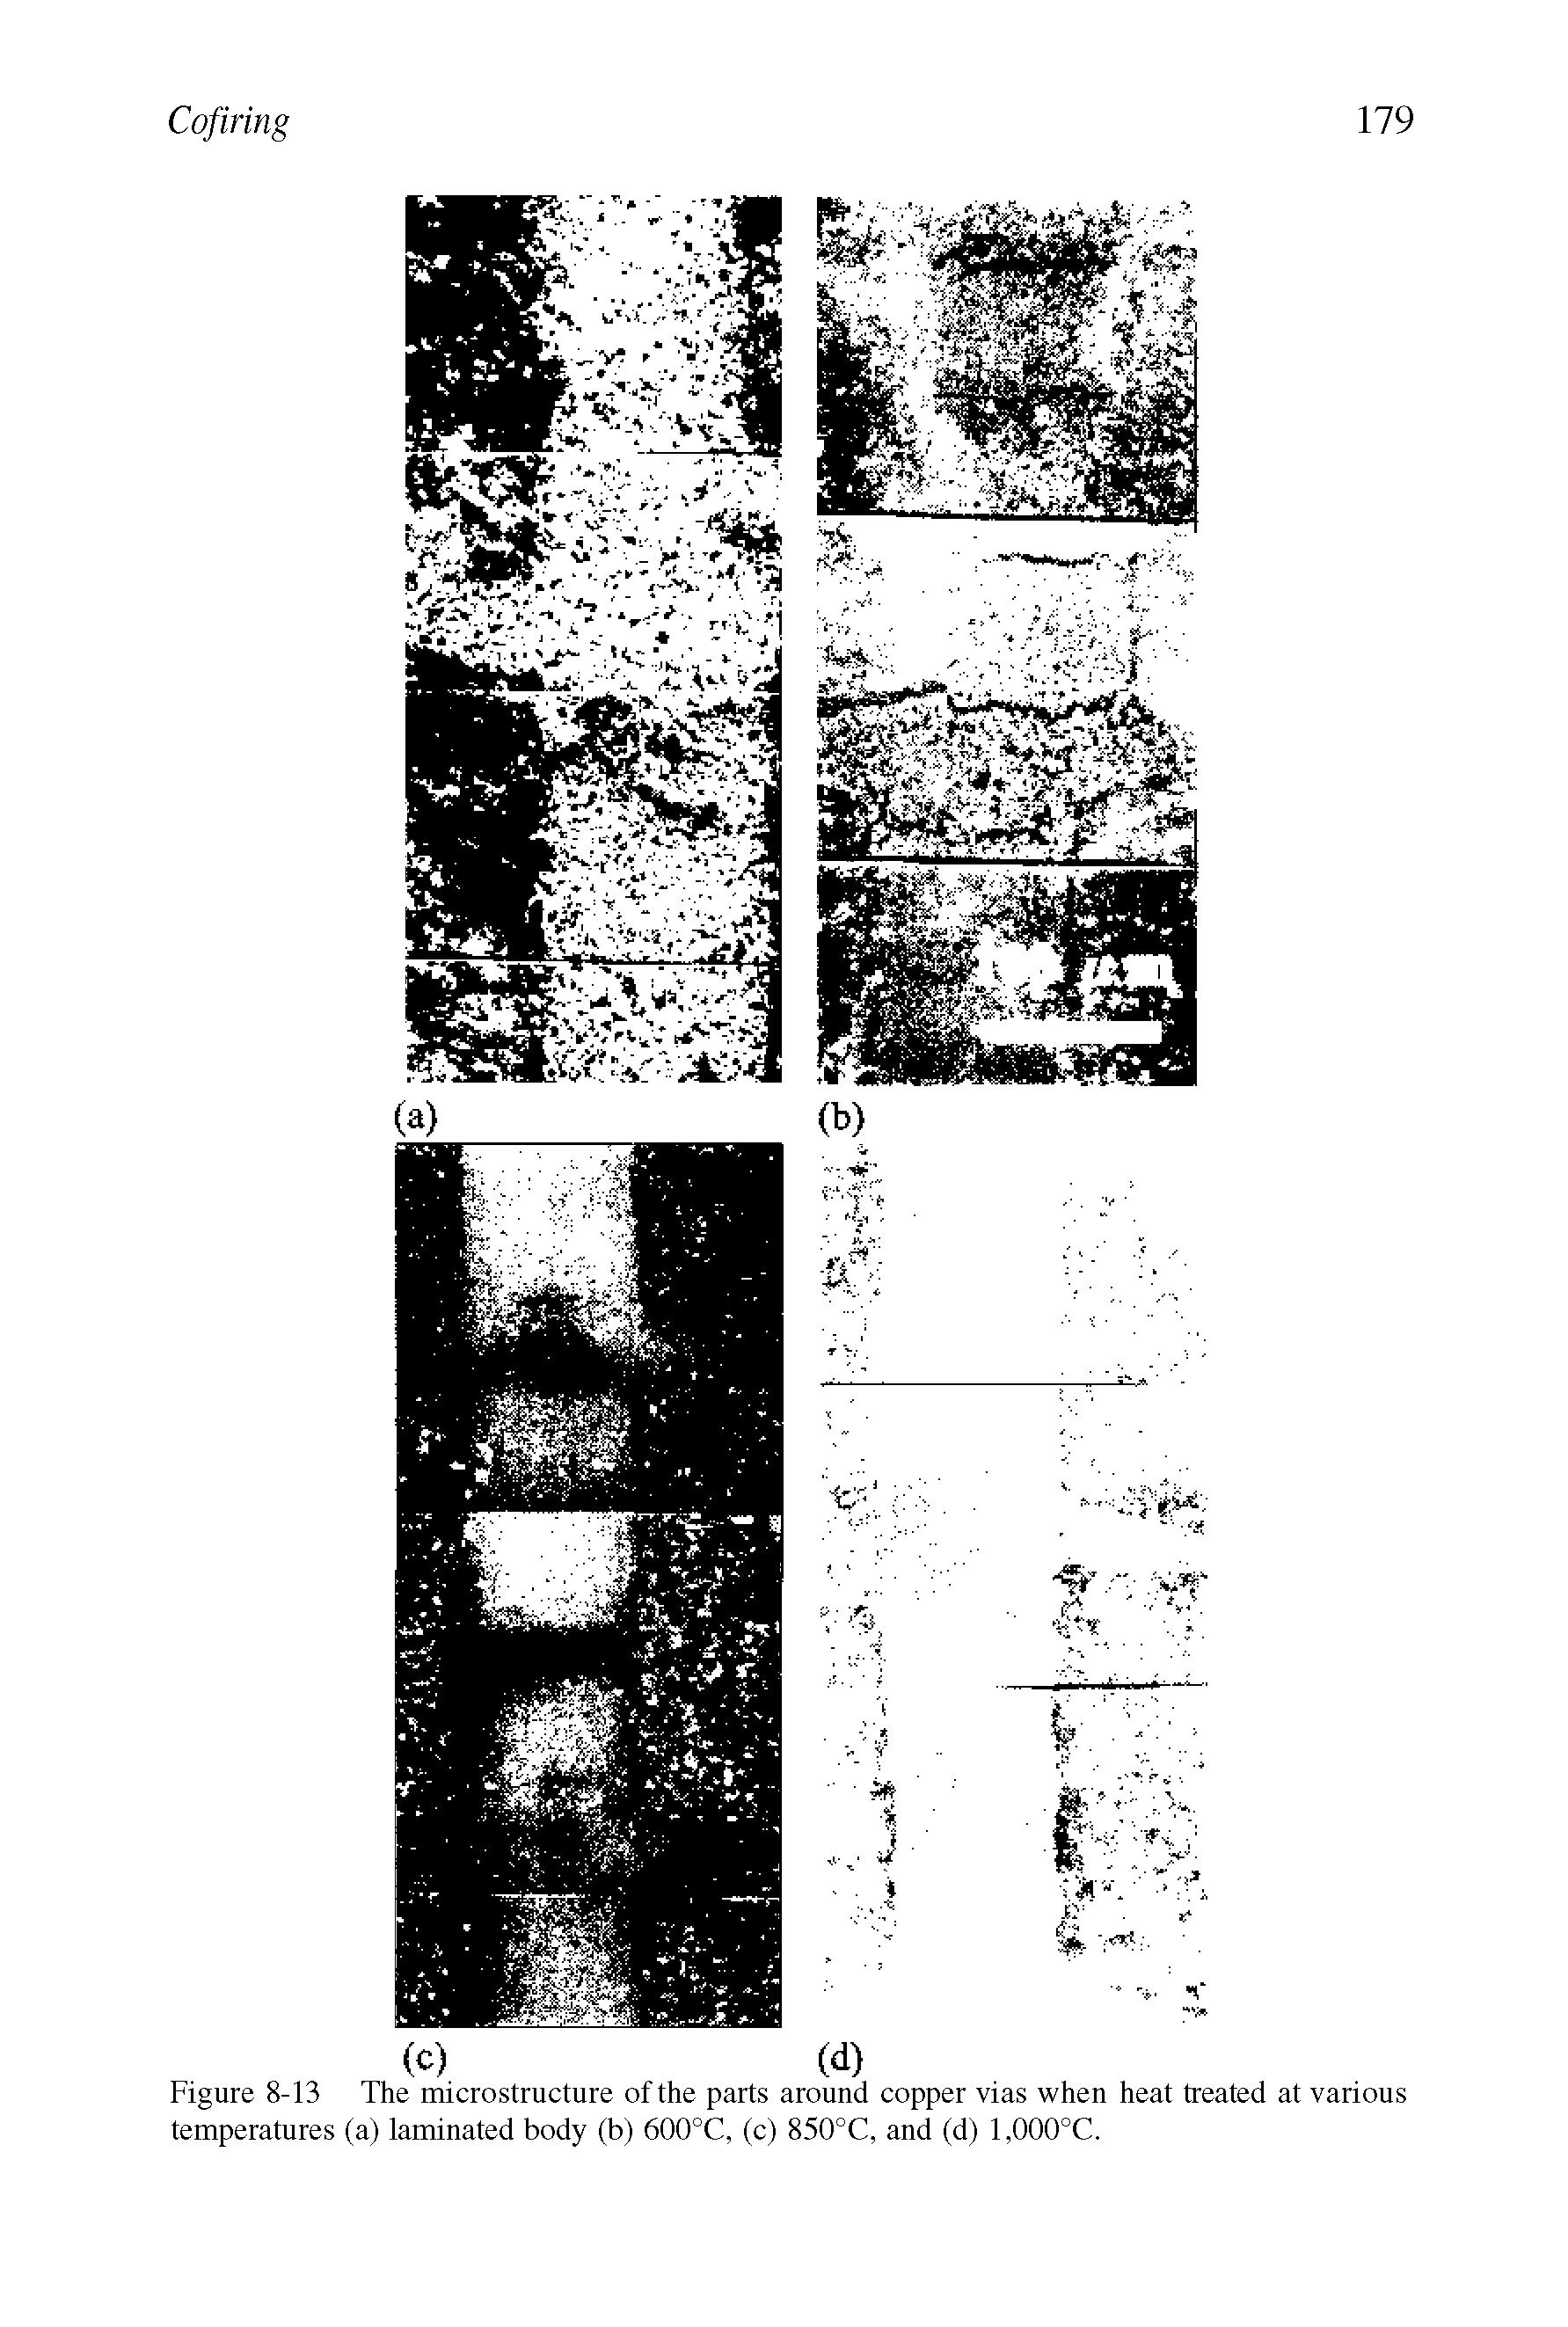 Figure 8-13 The microstructure of the parts around copper vias when heat treated at various temperatures (a) laminated body (b) 600°C, (c) 850°C, and (d) 1,000°C.